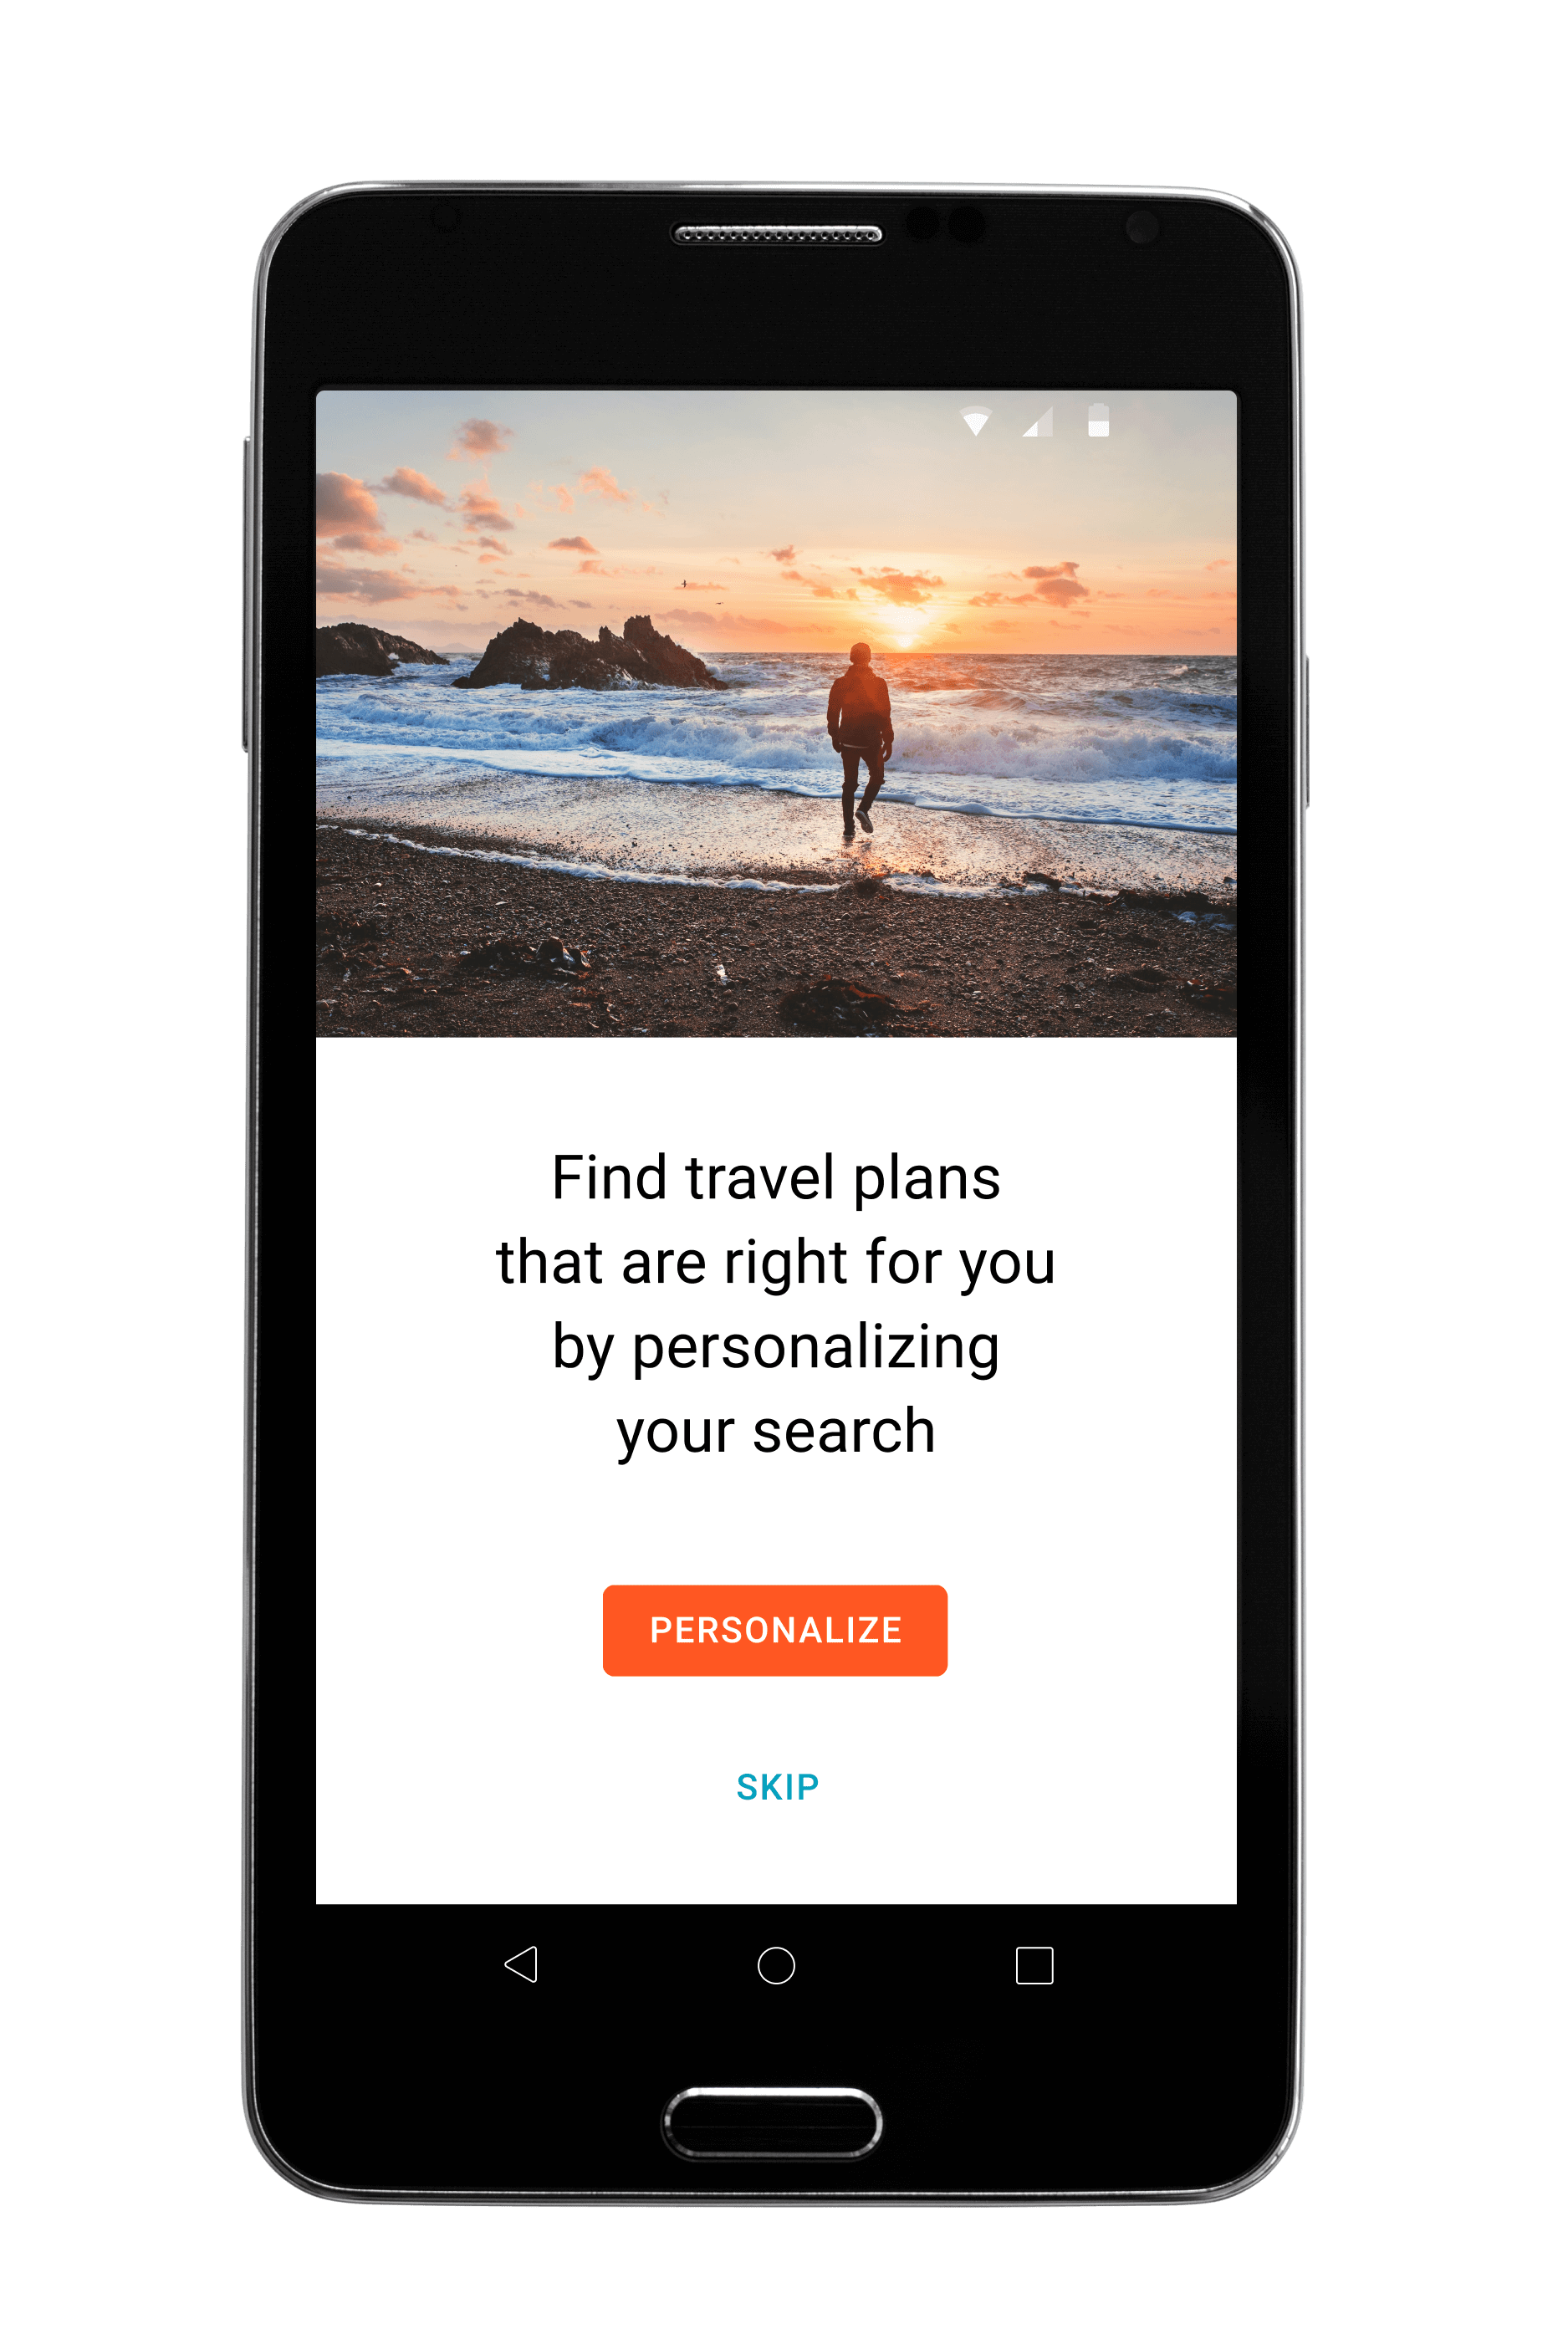 Image of a phone displaying thr page where users can personalize their search.